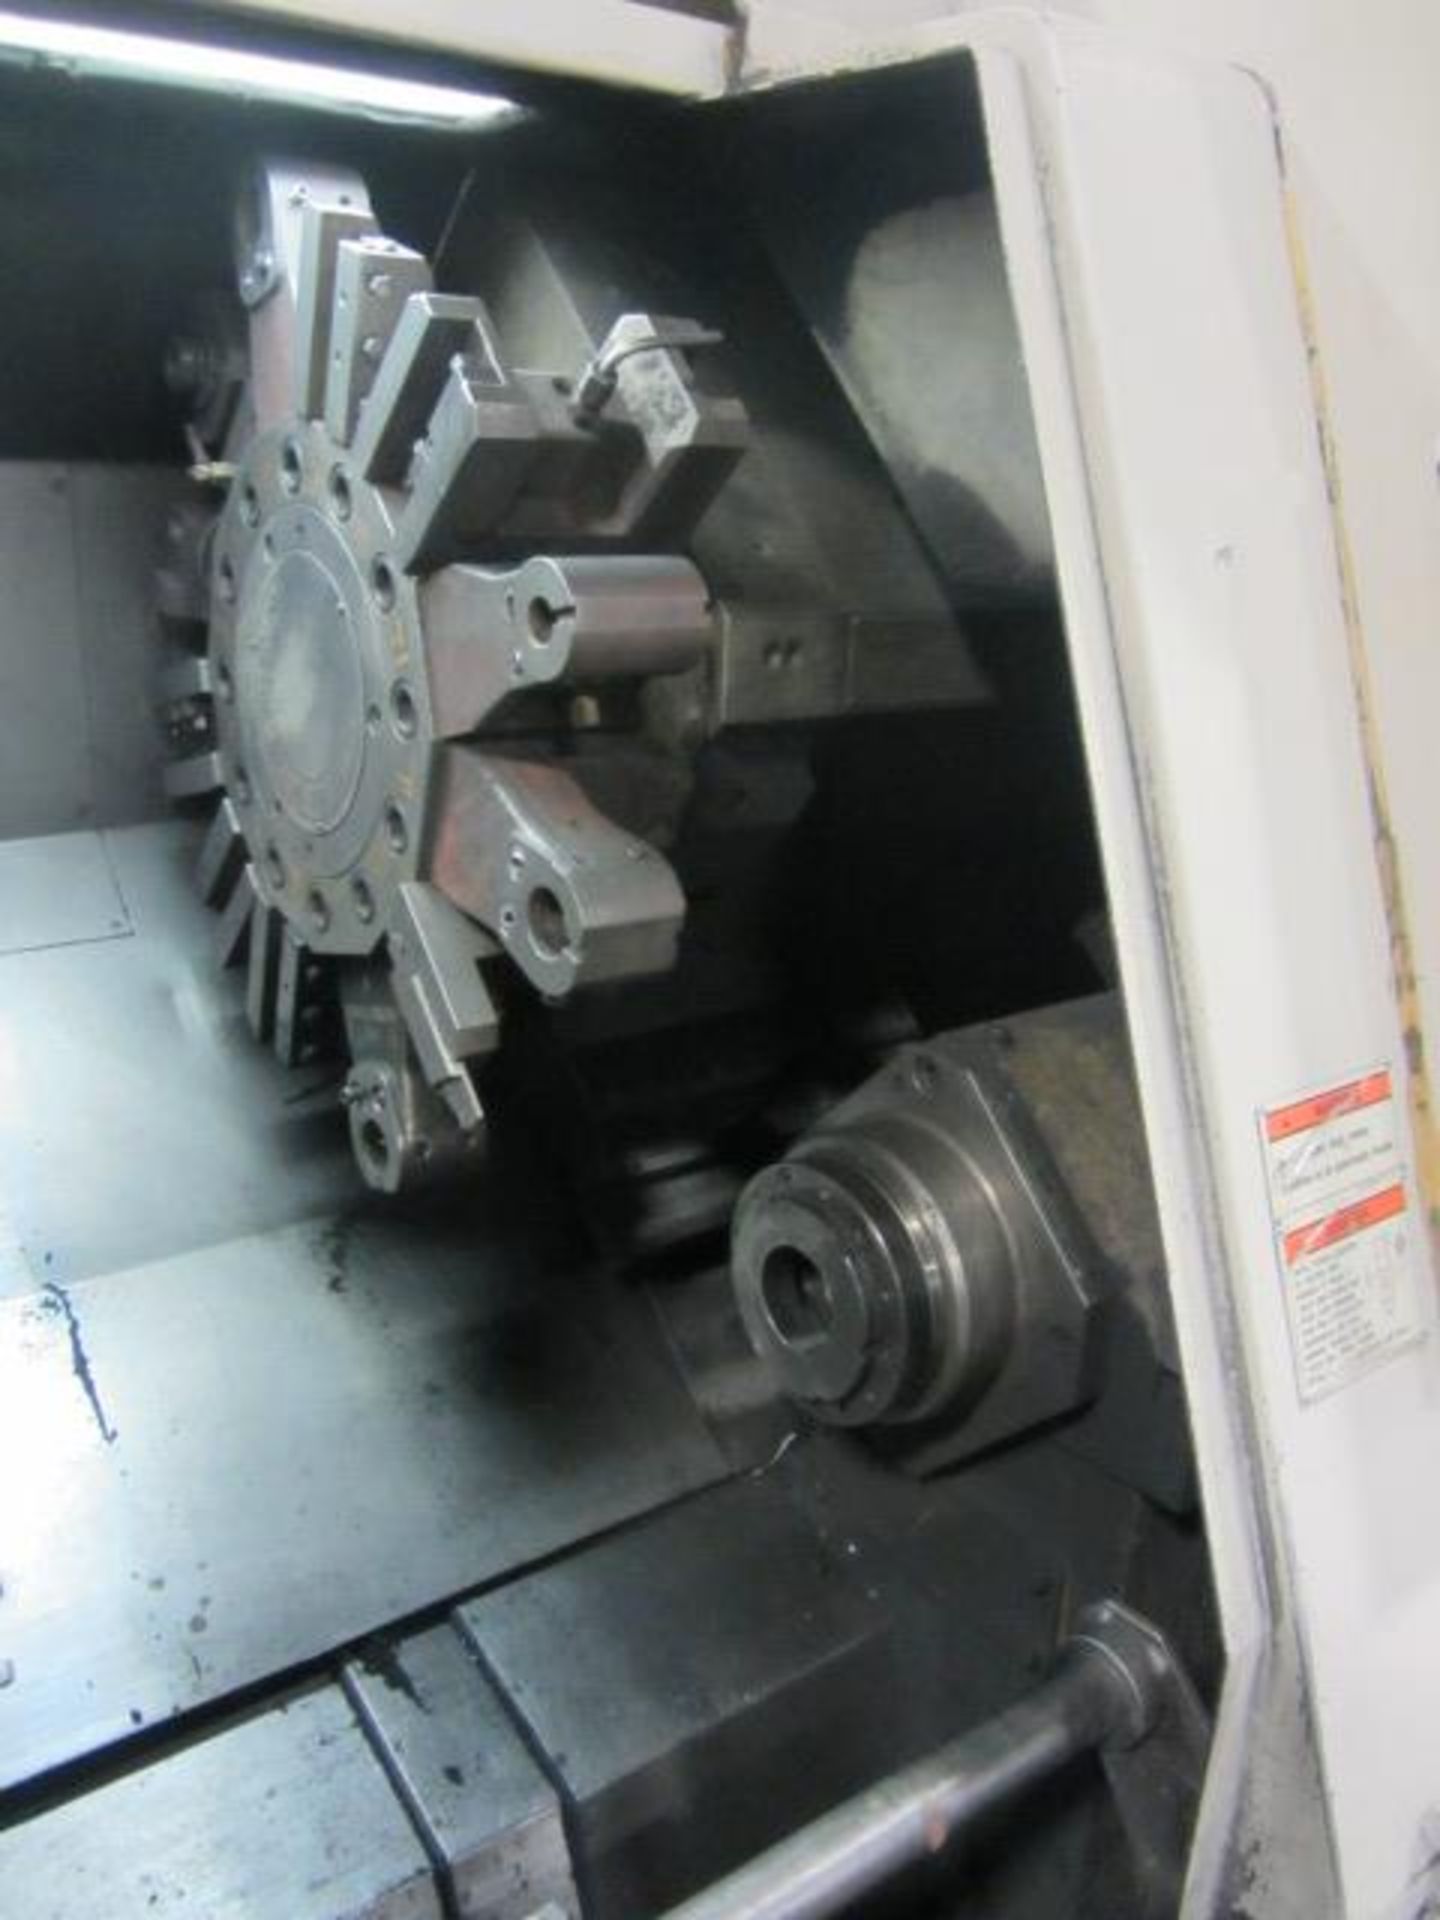 Mazak Super Quick Turn 10MS CNC Turning Center with Sub-Spindle, Milling, 6'' 3-Jaw Power Chuck, - Image 8 of 8